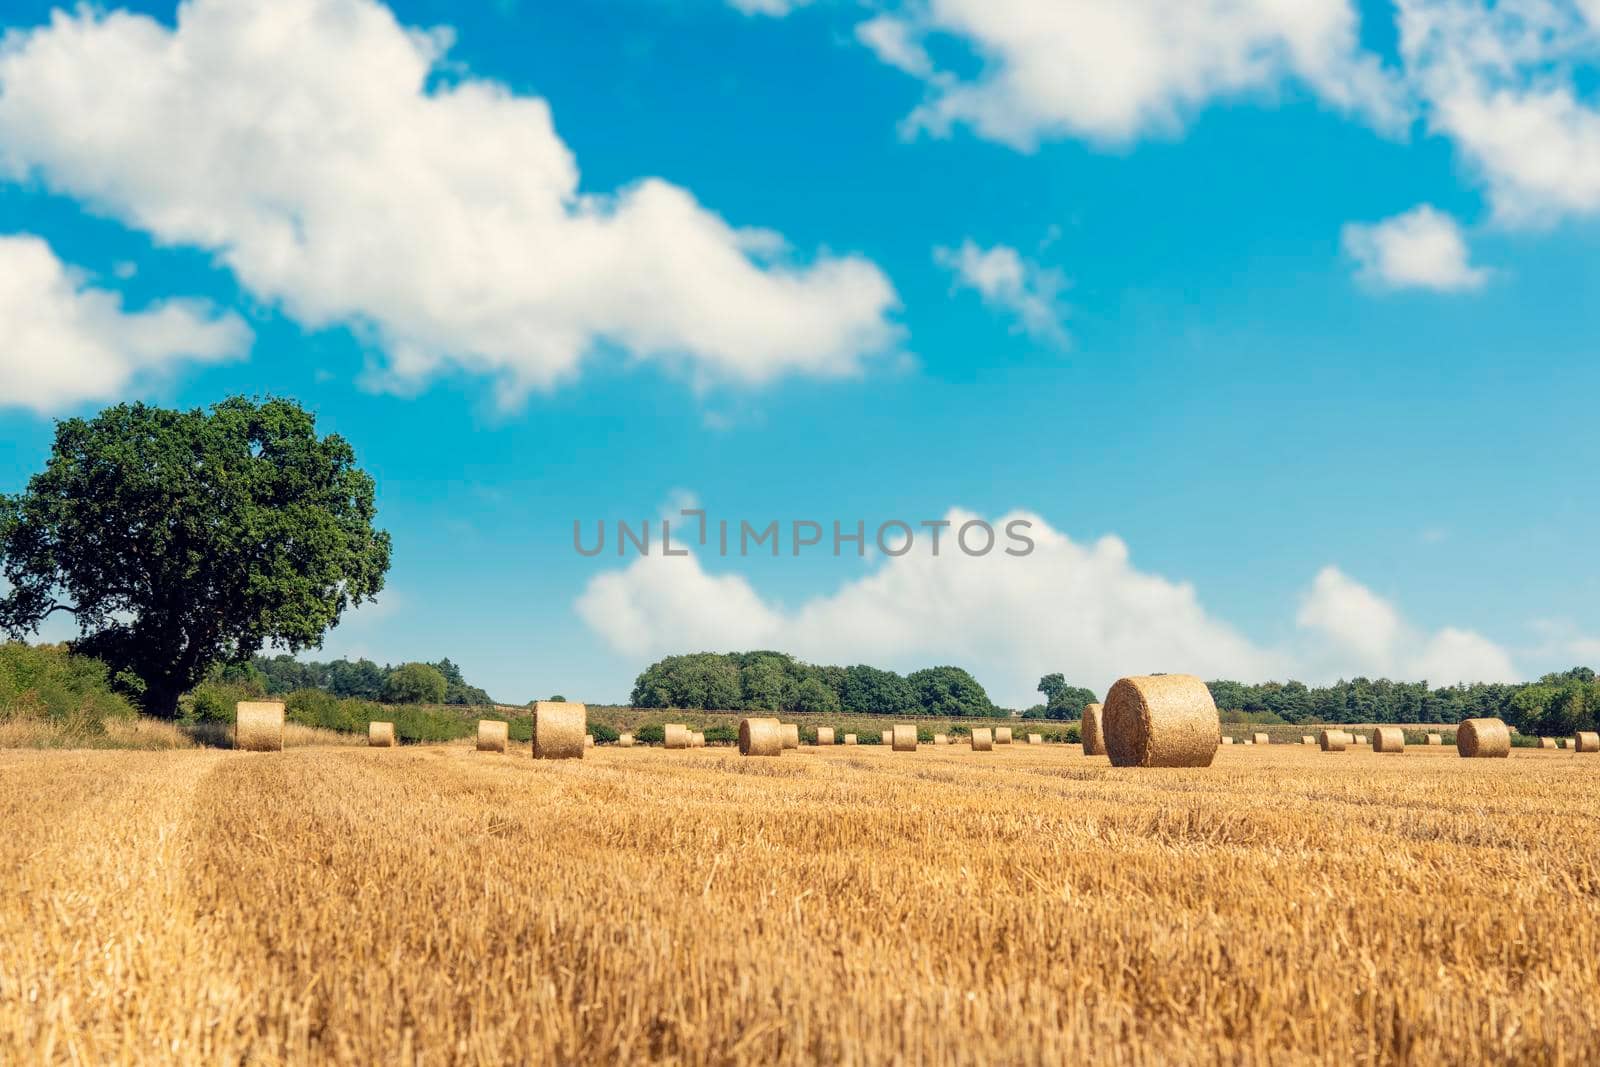 Hay bale and straw in the field. English Rural landscape. Wheat yellow golden harvest in summer. Countryside natural landscape. Grain crop, harvesting